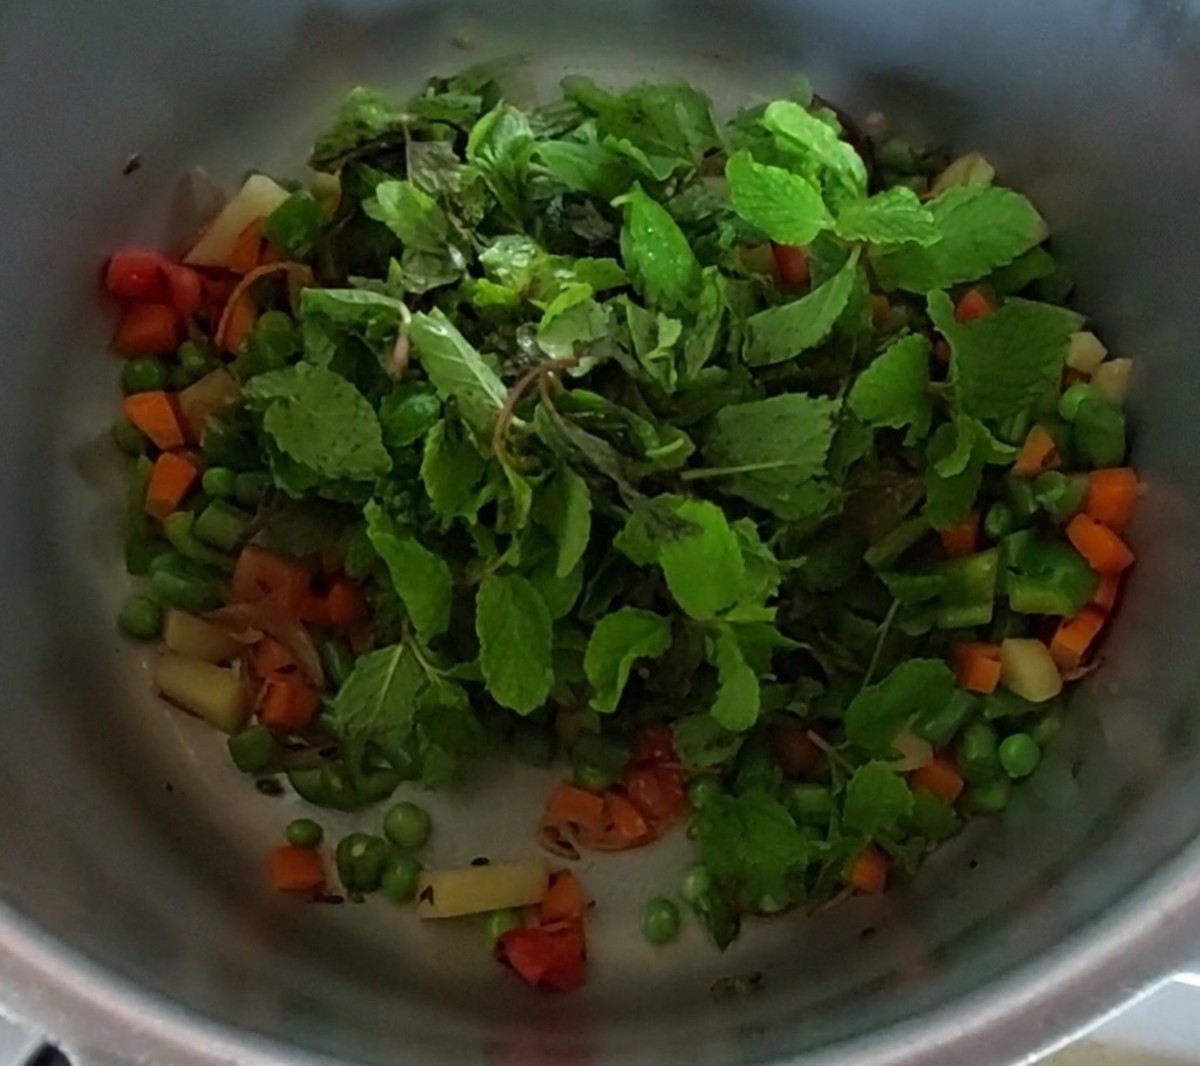 Add 1 cup mint leaves and saute till they shrink.